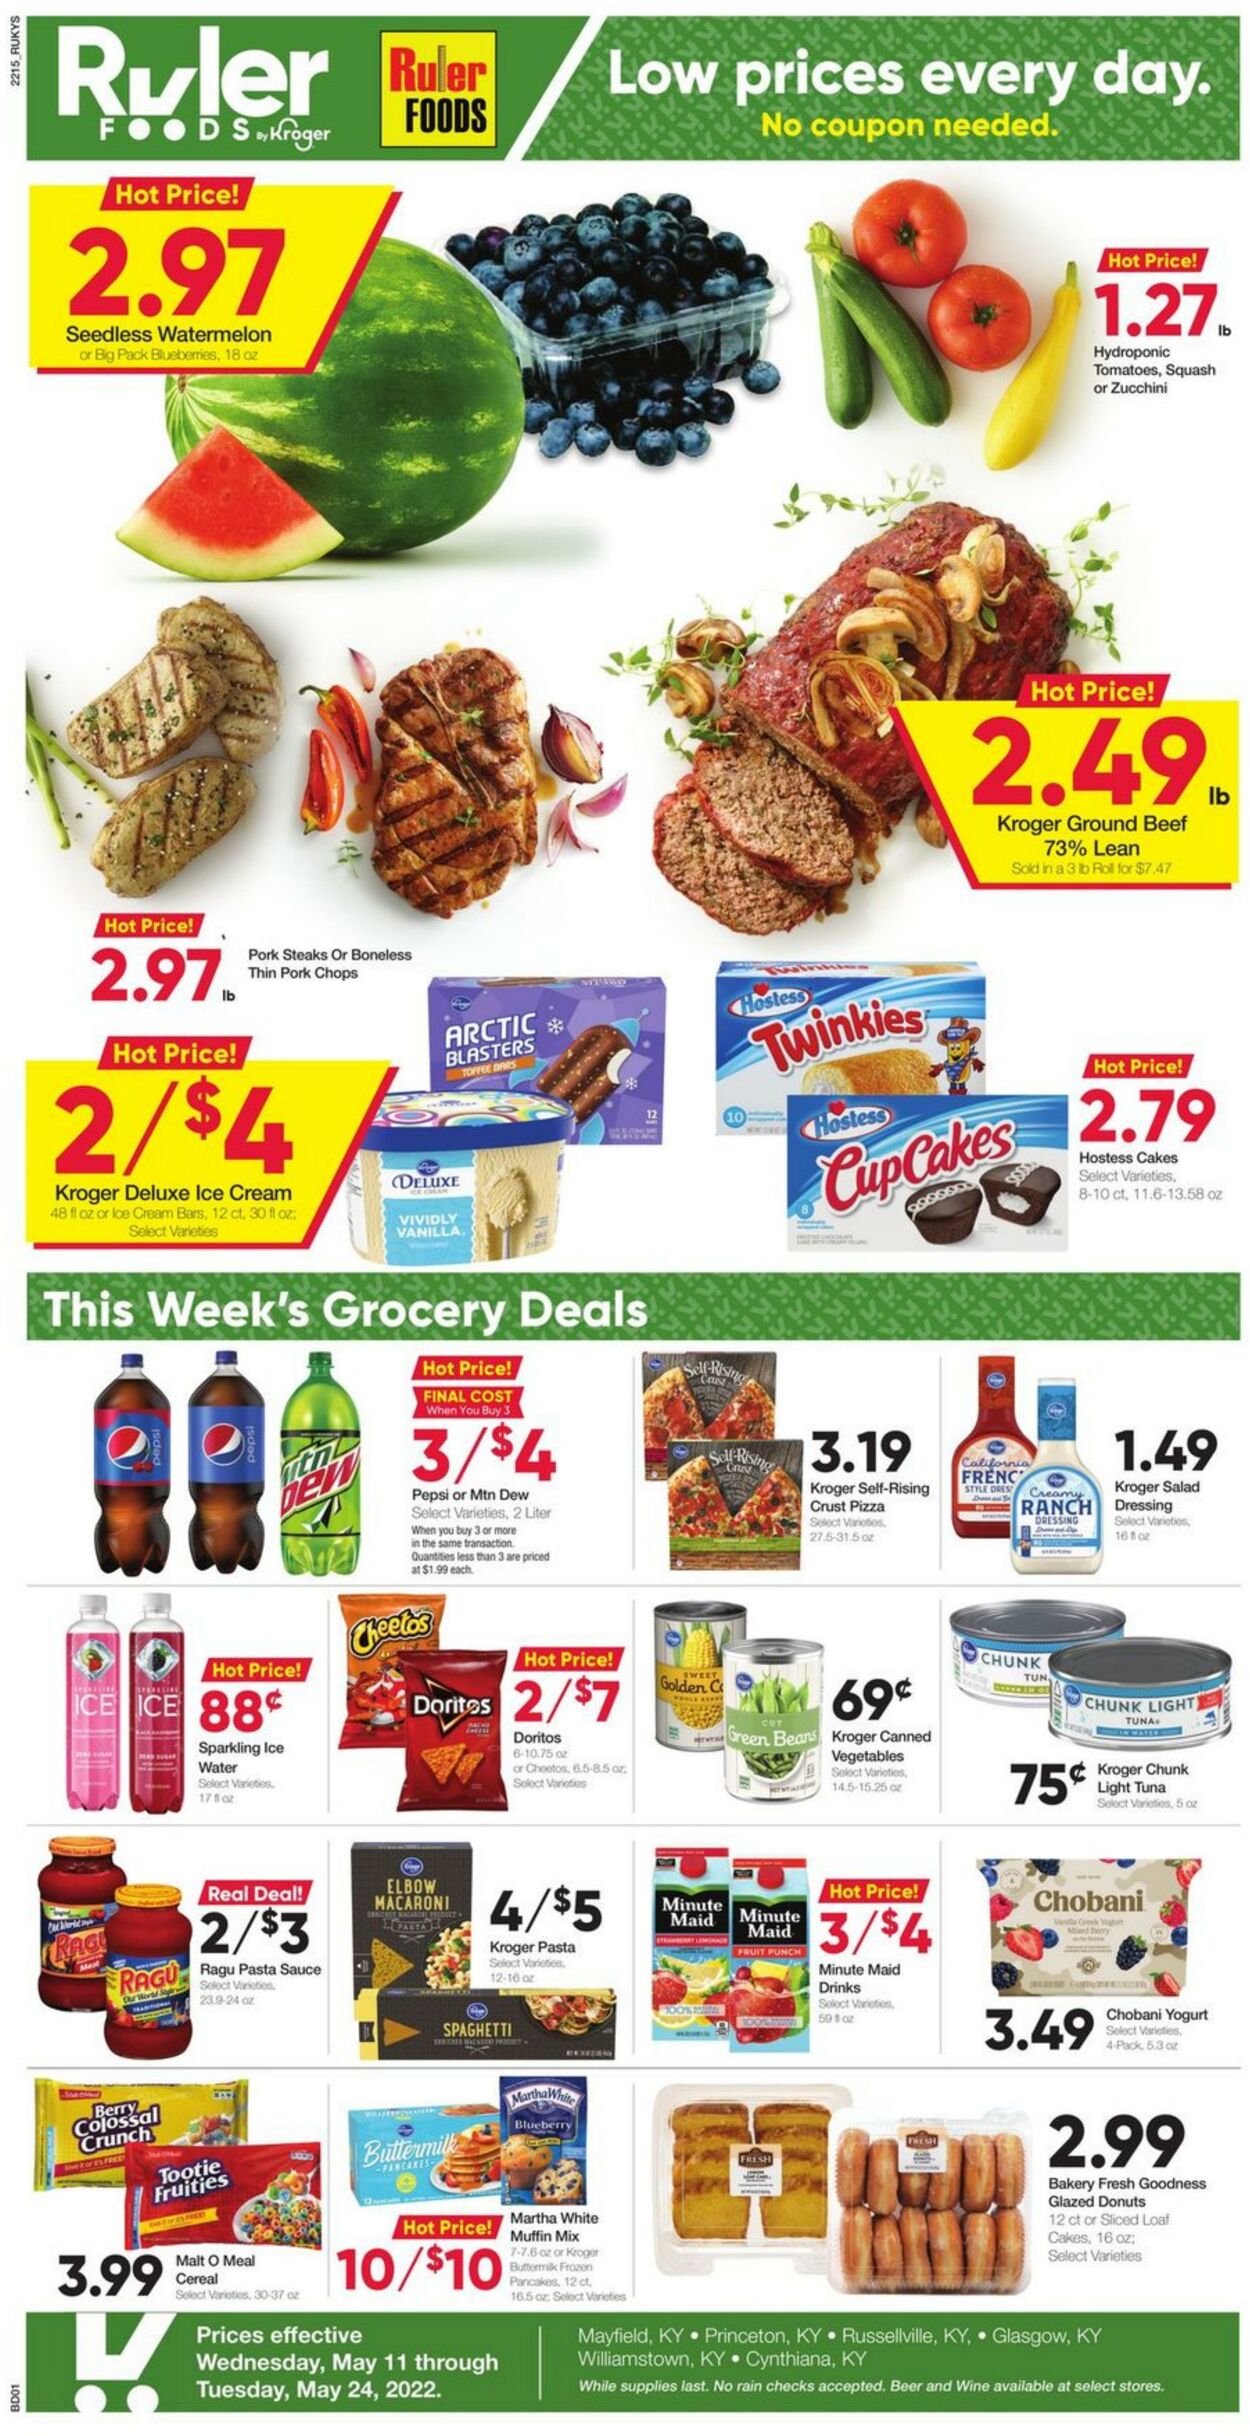 Ruler Foods Promotional weekly ads